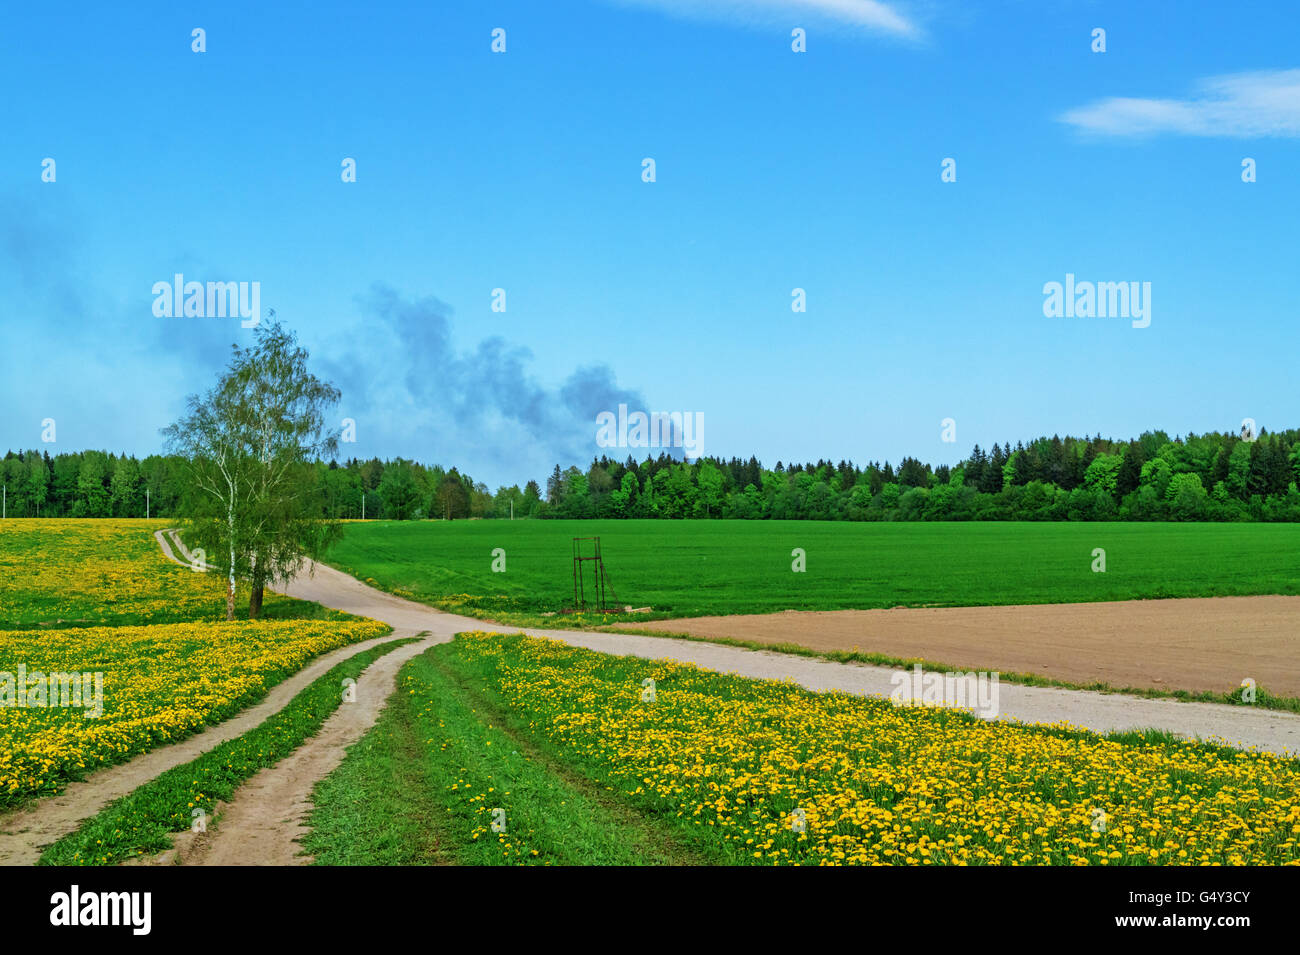 Ground road through agricultural field.Along the road plowed brown fields and green grain fields.Along the road dandelions grow. Stock Photo